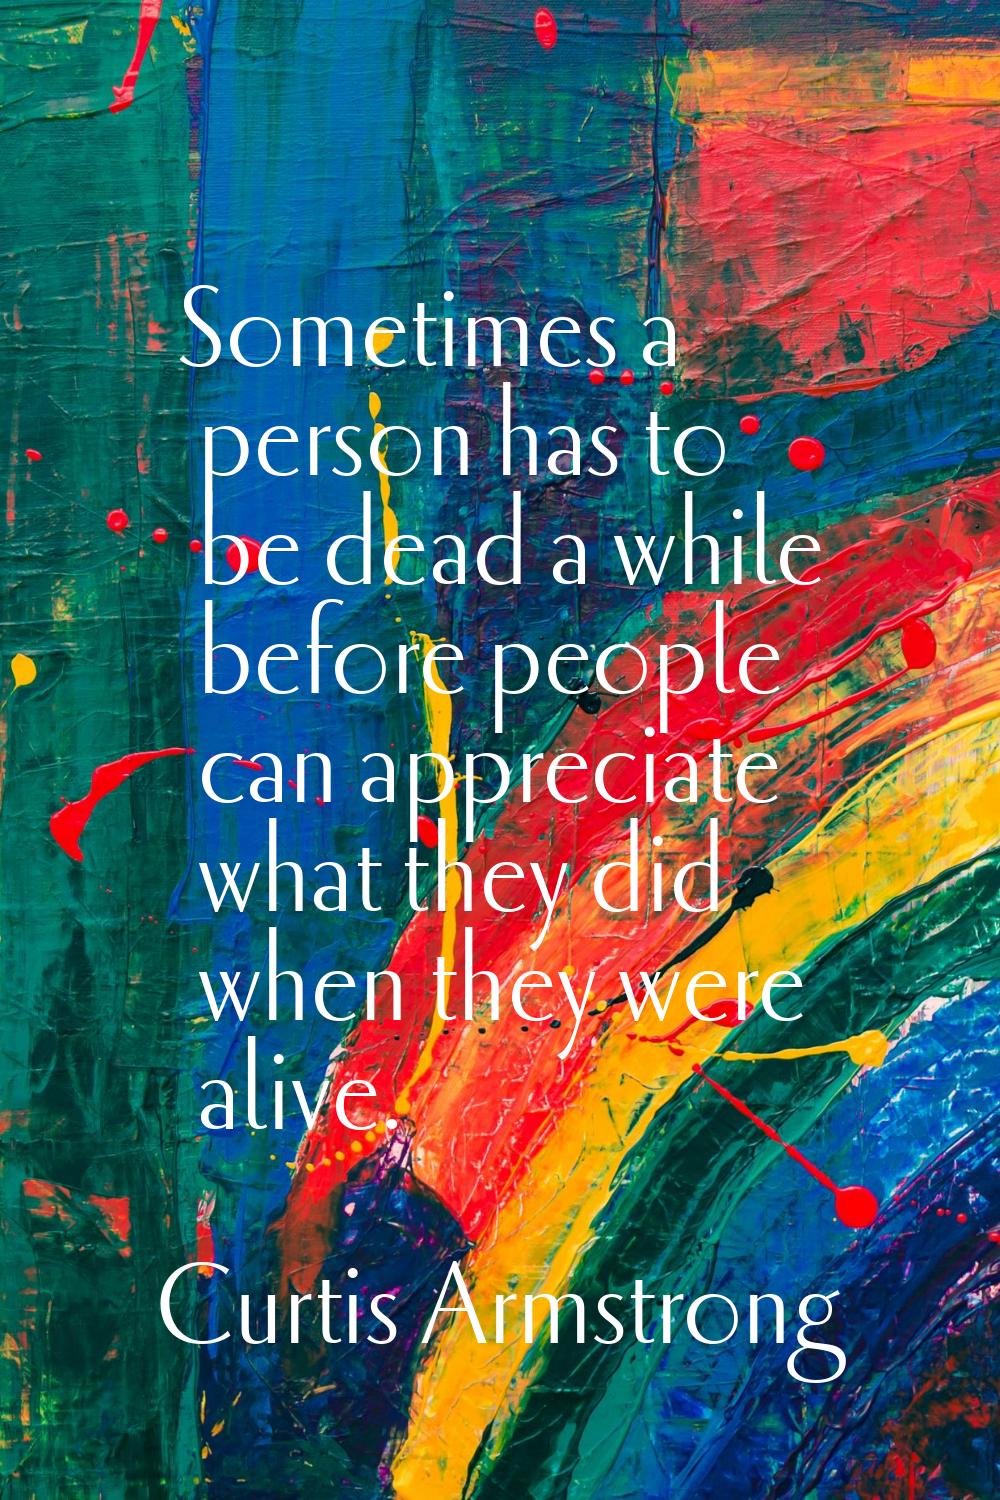 Sometimes a person has to be dead a while before people can appreciate what they did when they were